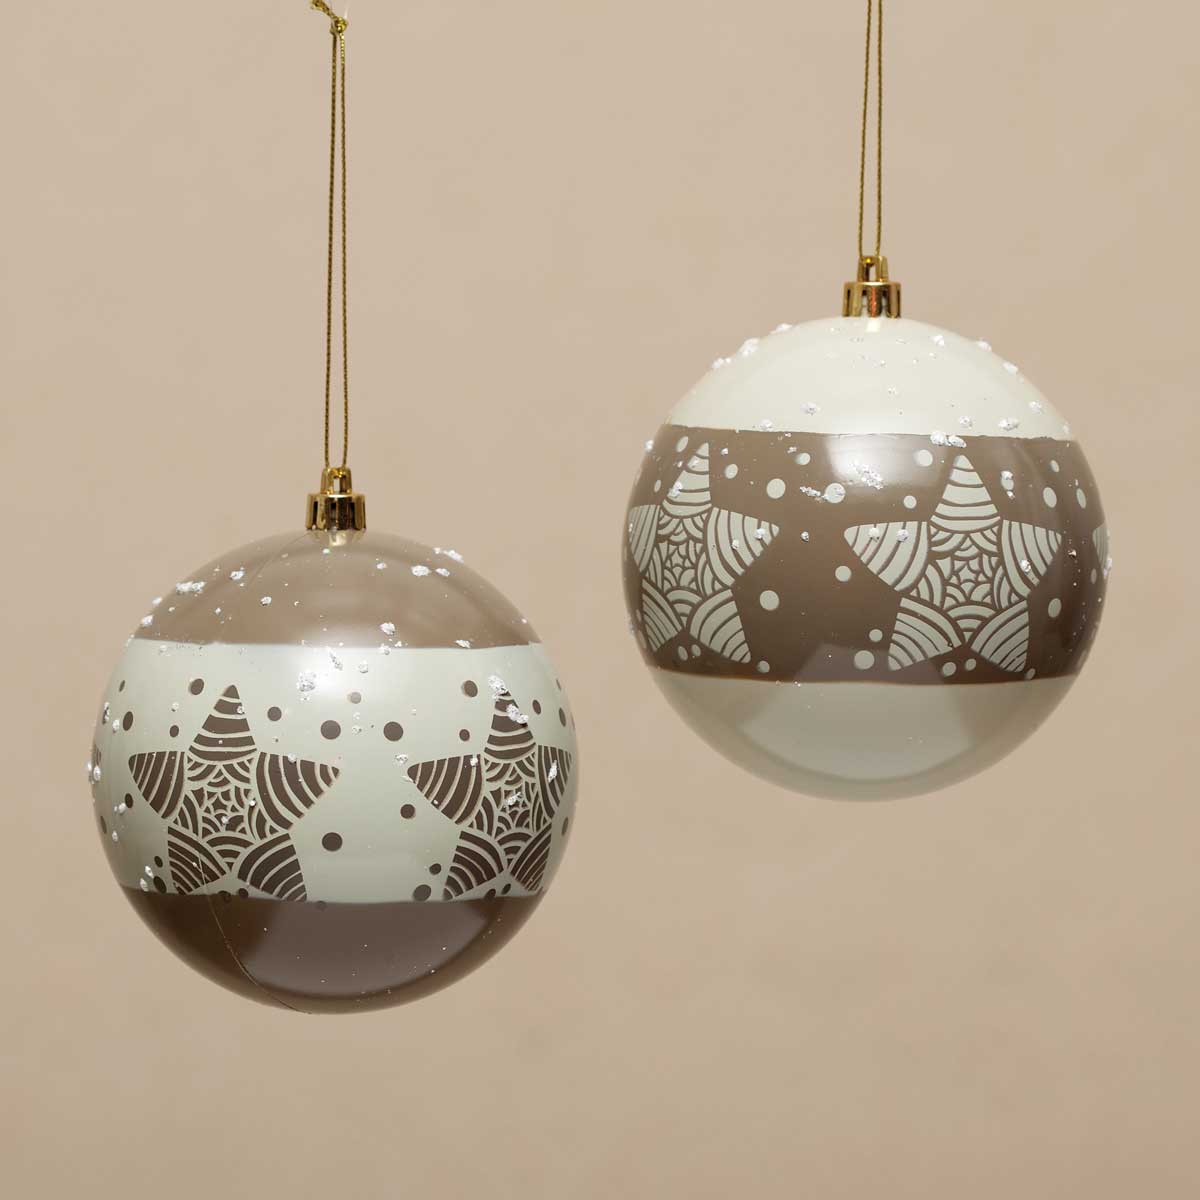 b70 ORNAMENT STAR BALL 2 ASSORTED 4IN